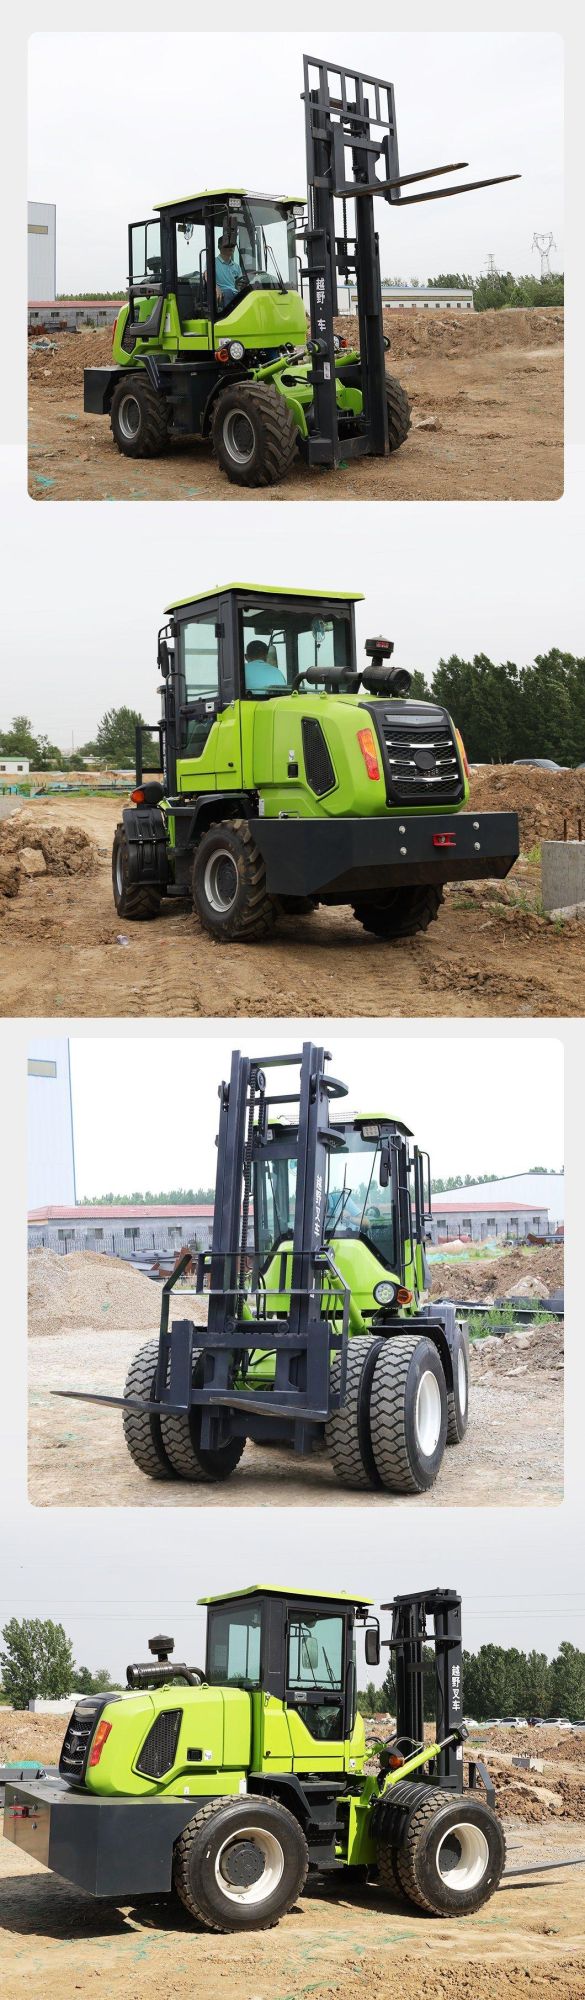 Hot Sale 6 Ton Heavy Duty off Road Diesel Forklift Price in Malaysia